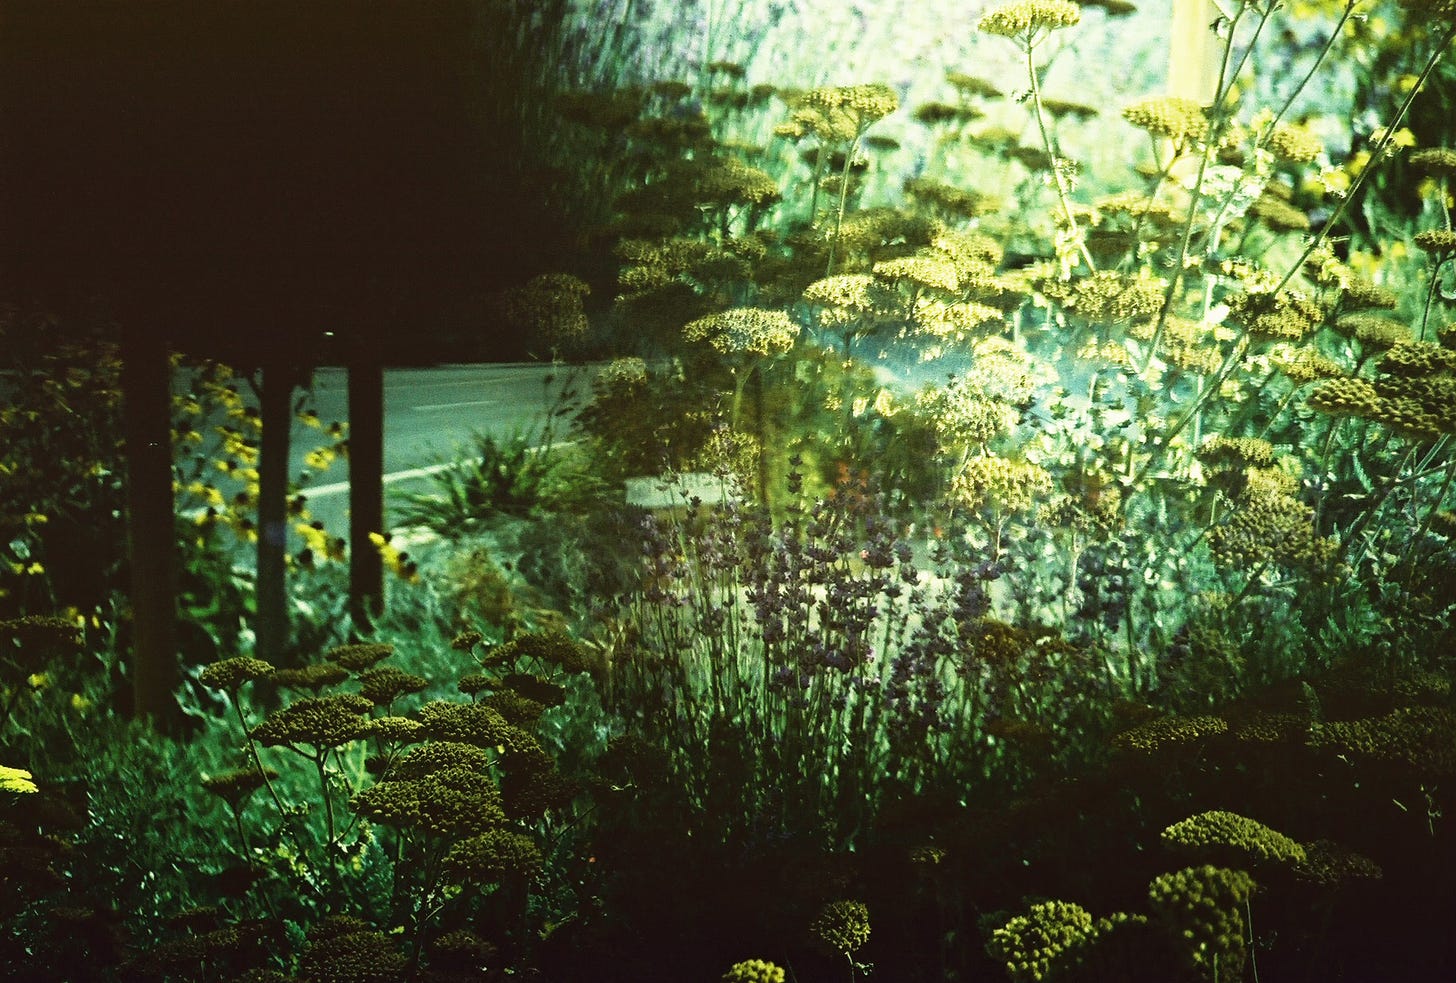 A double exposure of flowers and weeds.